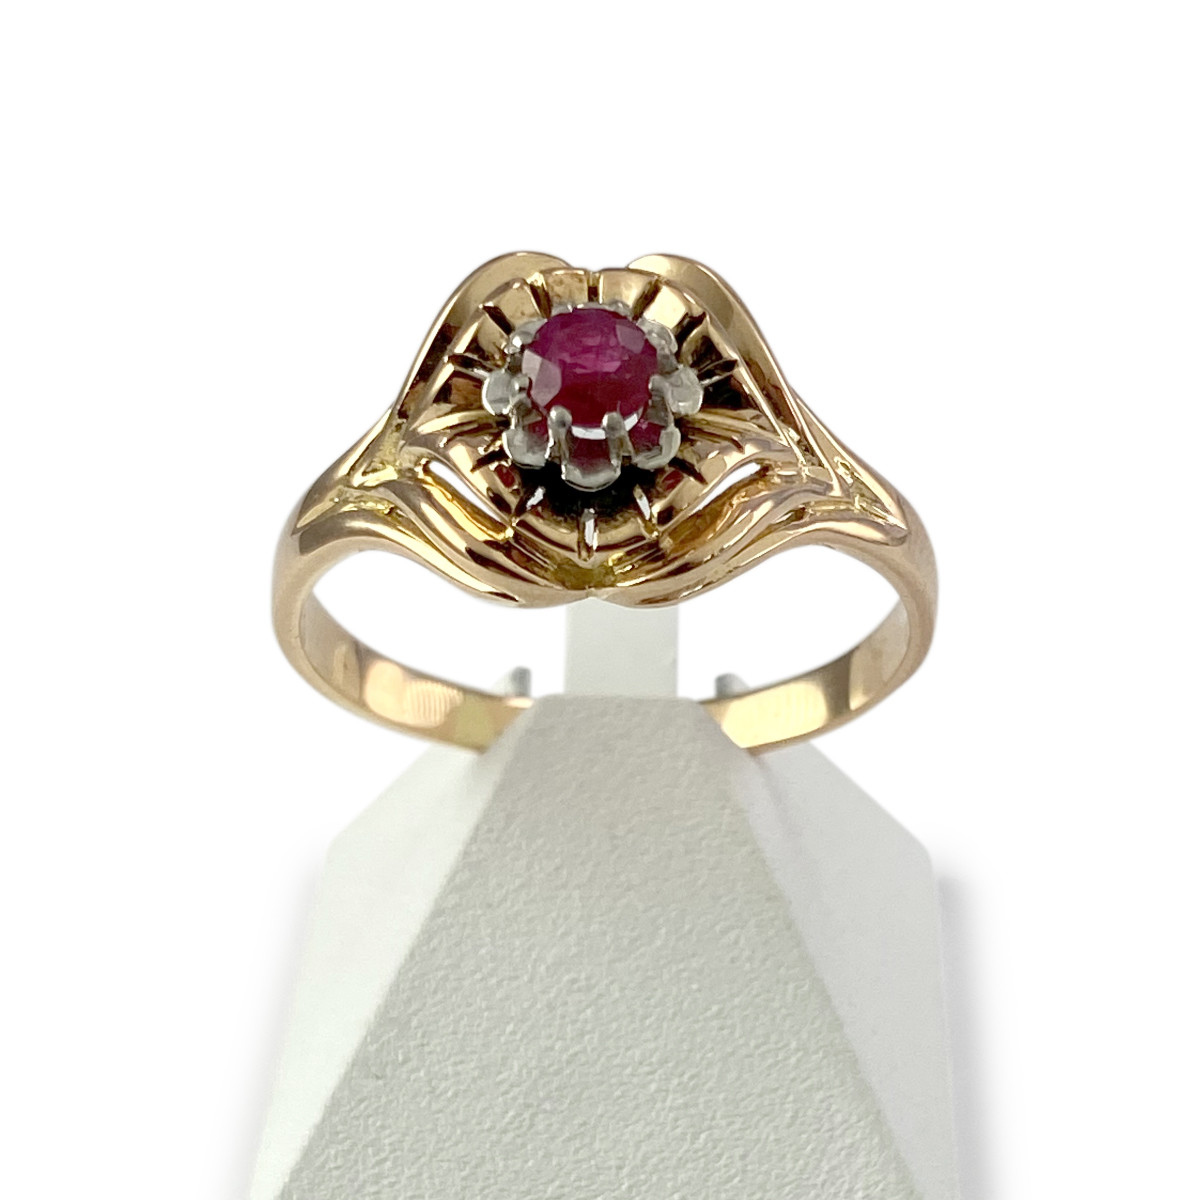 Bague d'occasion 2 ors 750 rubis